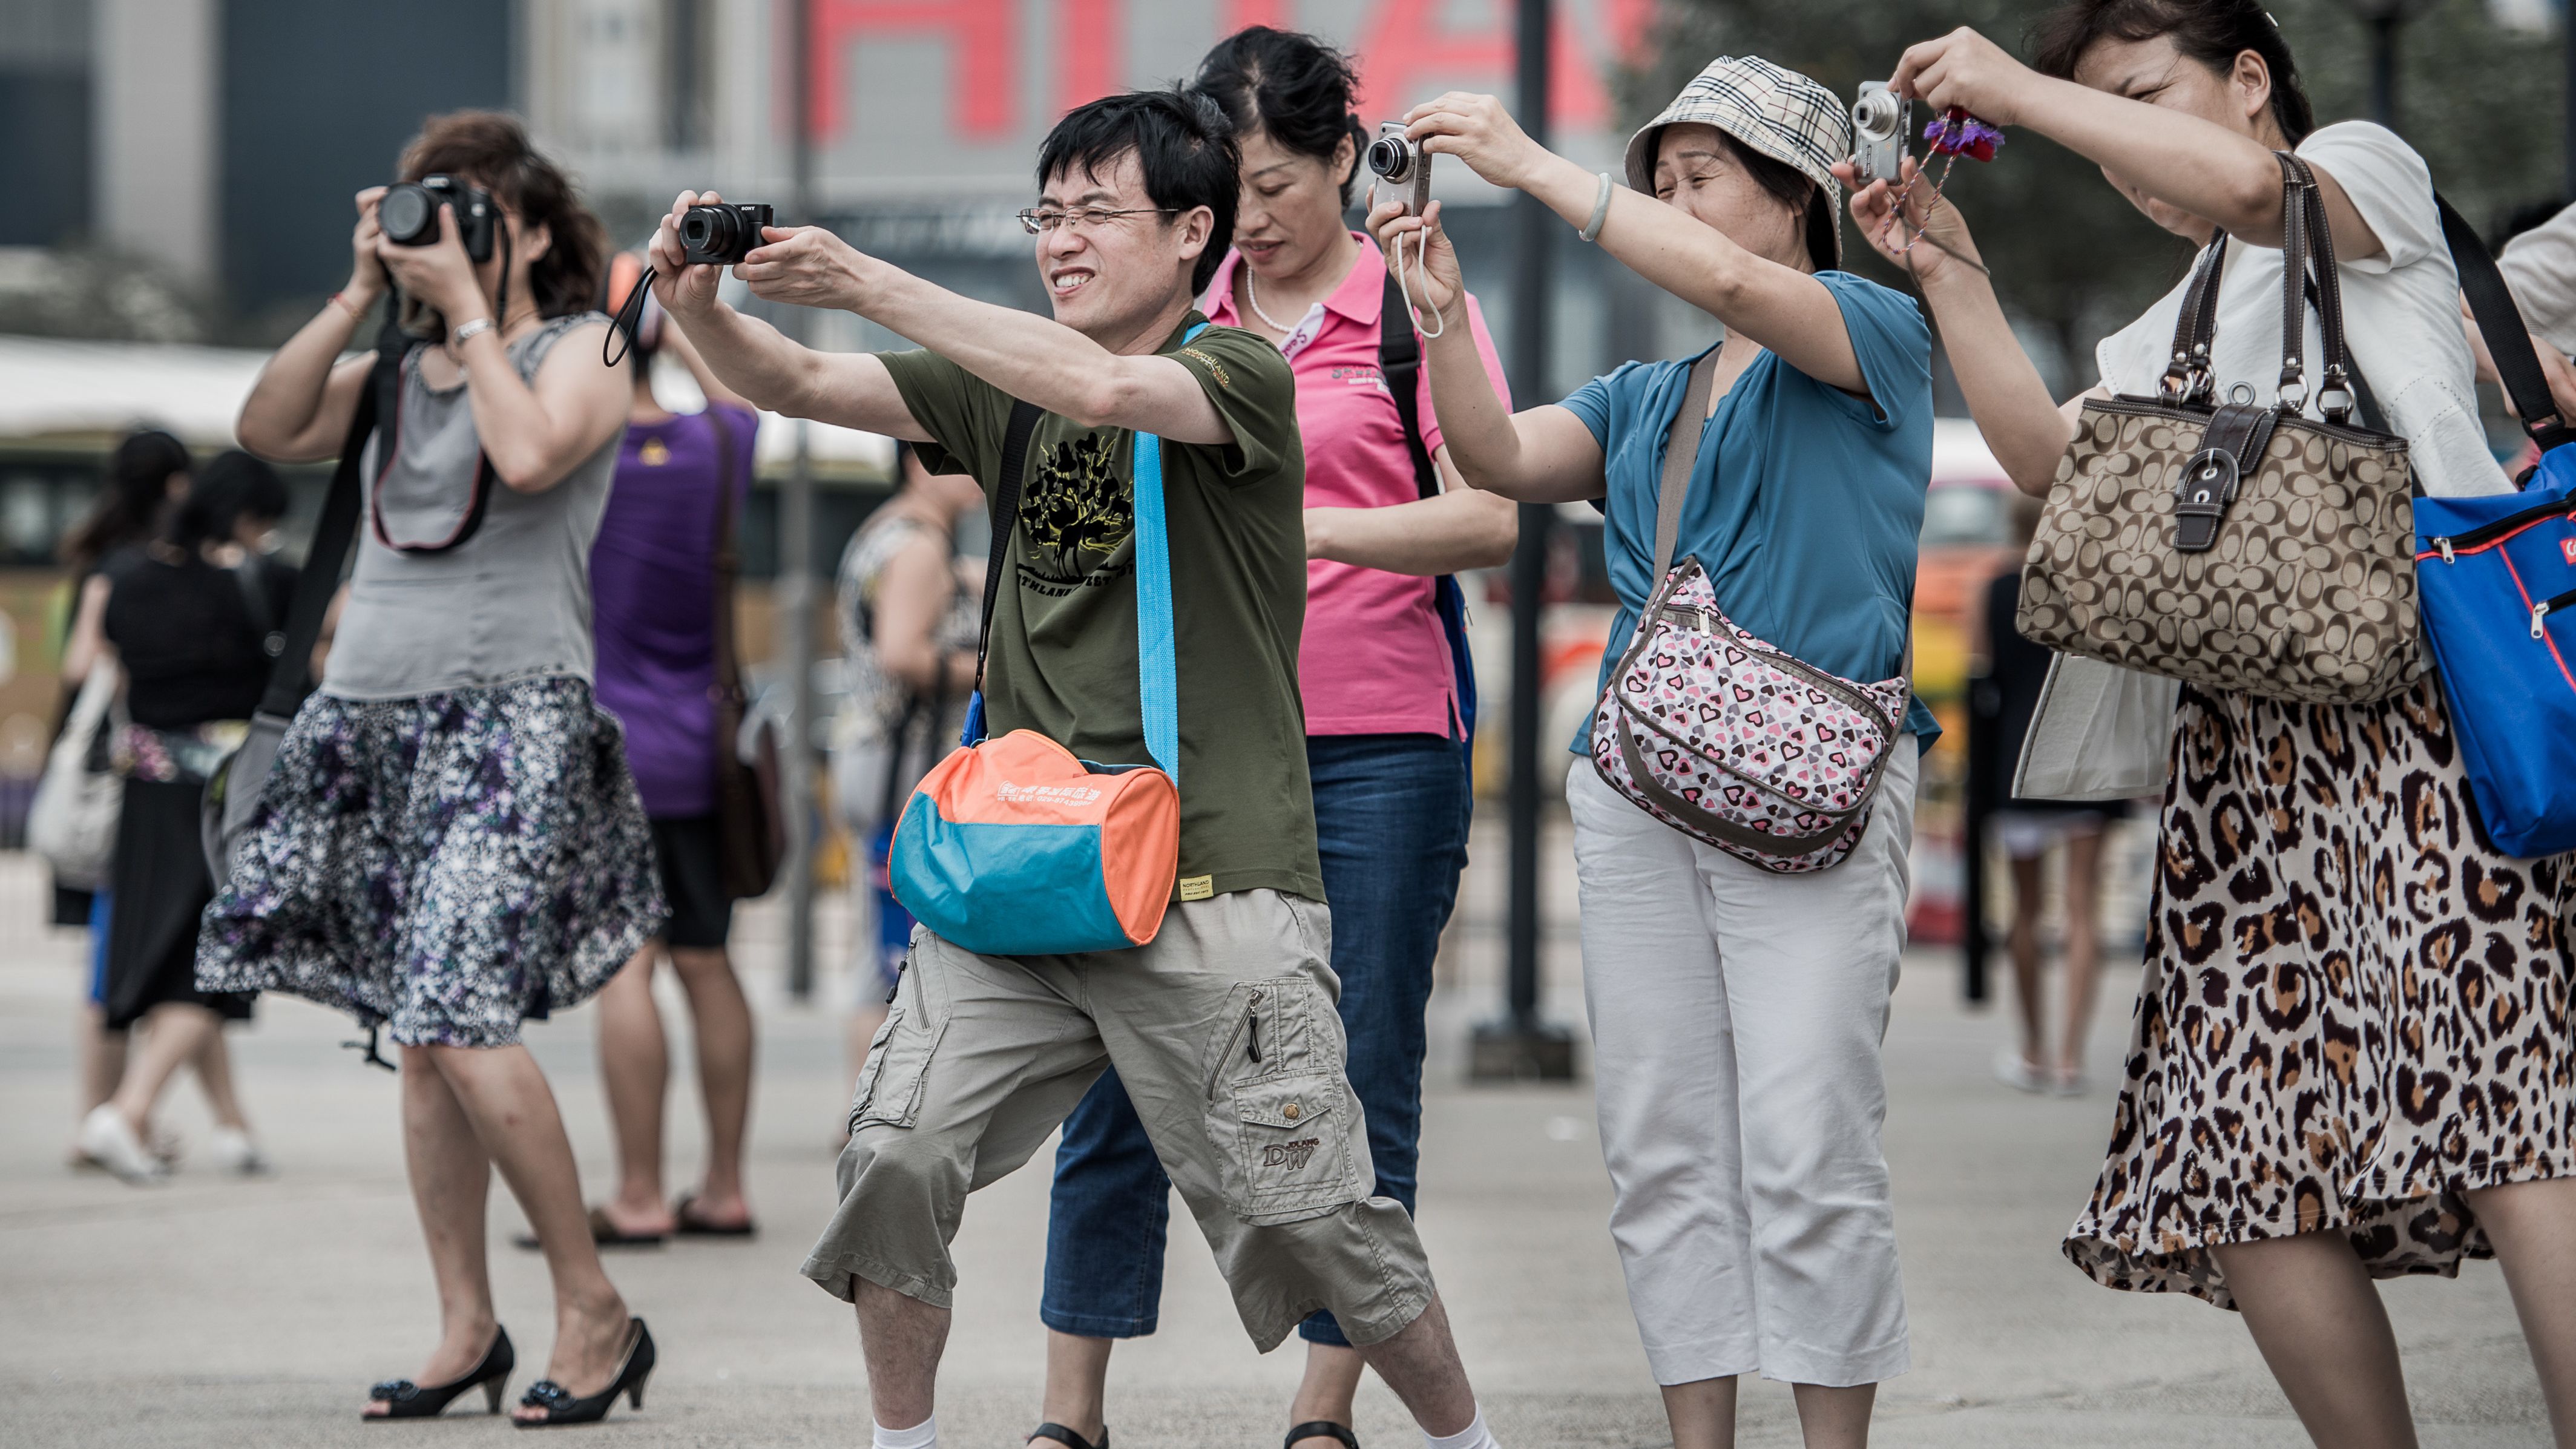 Mainland Chinese tourists break out the cameras to capture a special Hong Kong moment.